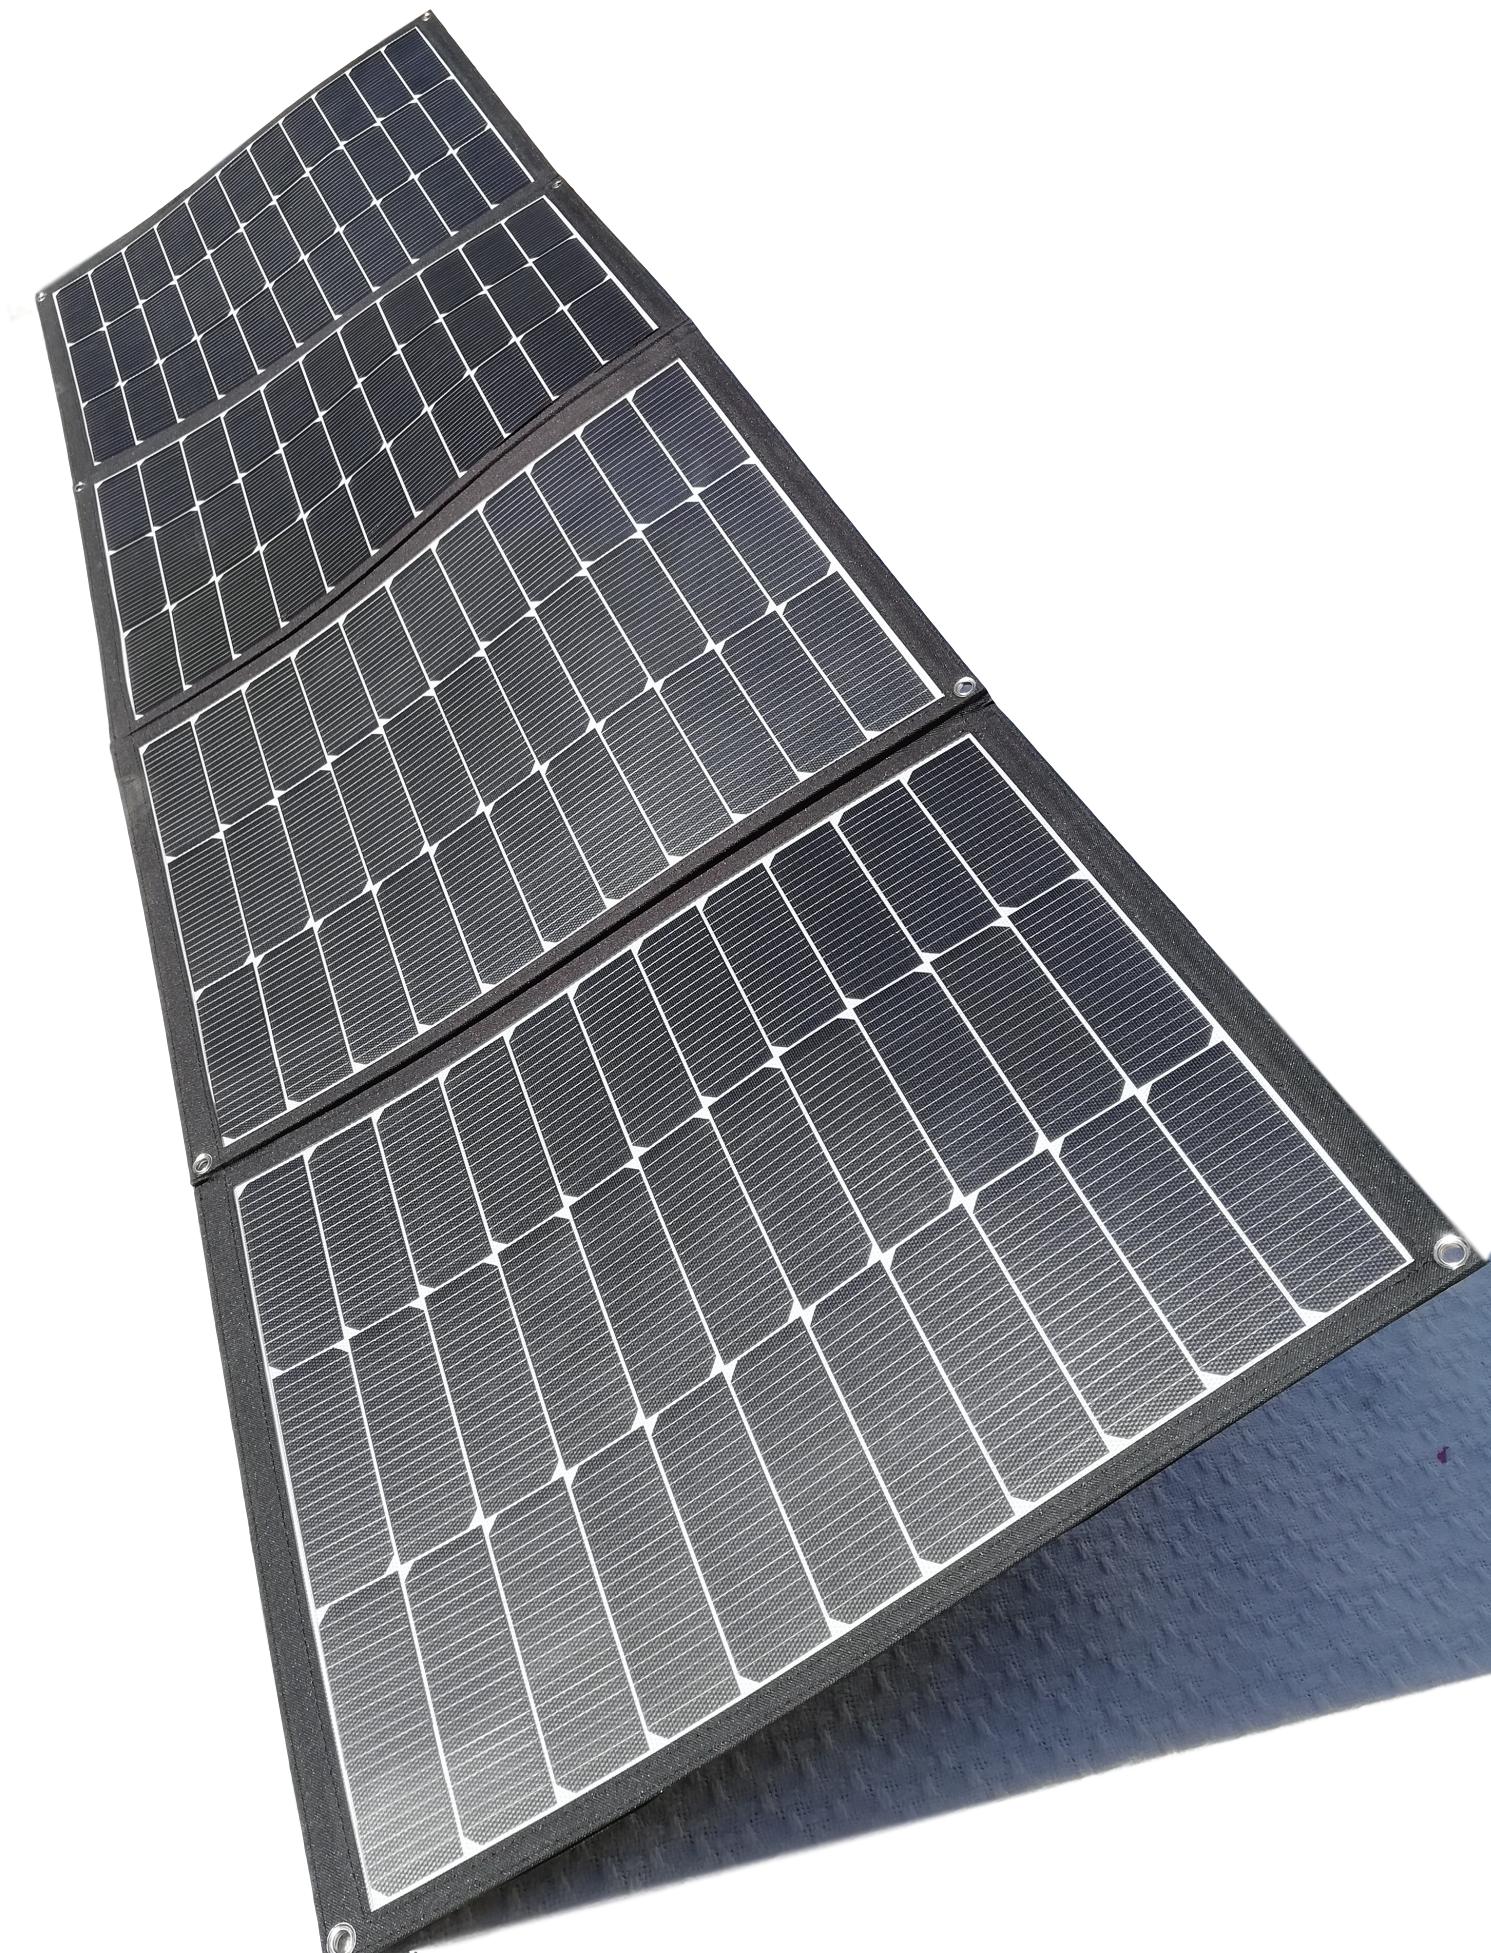 Mojave-220W foldable solar panel as one unit